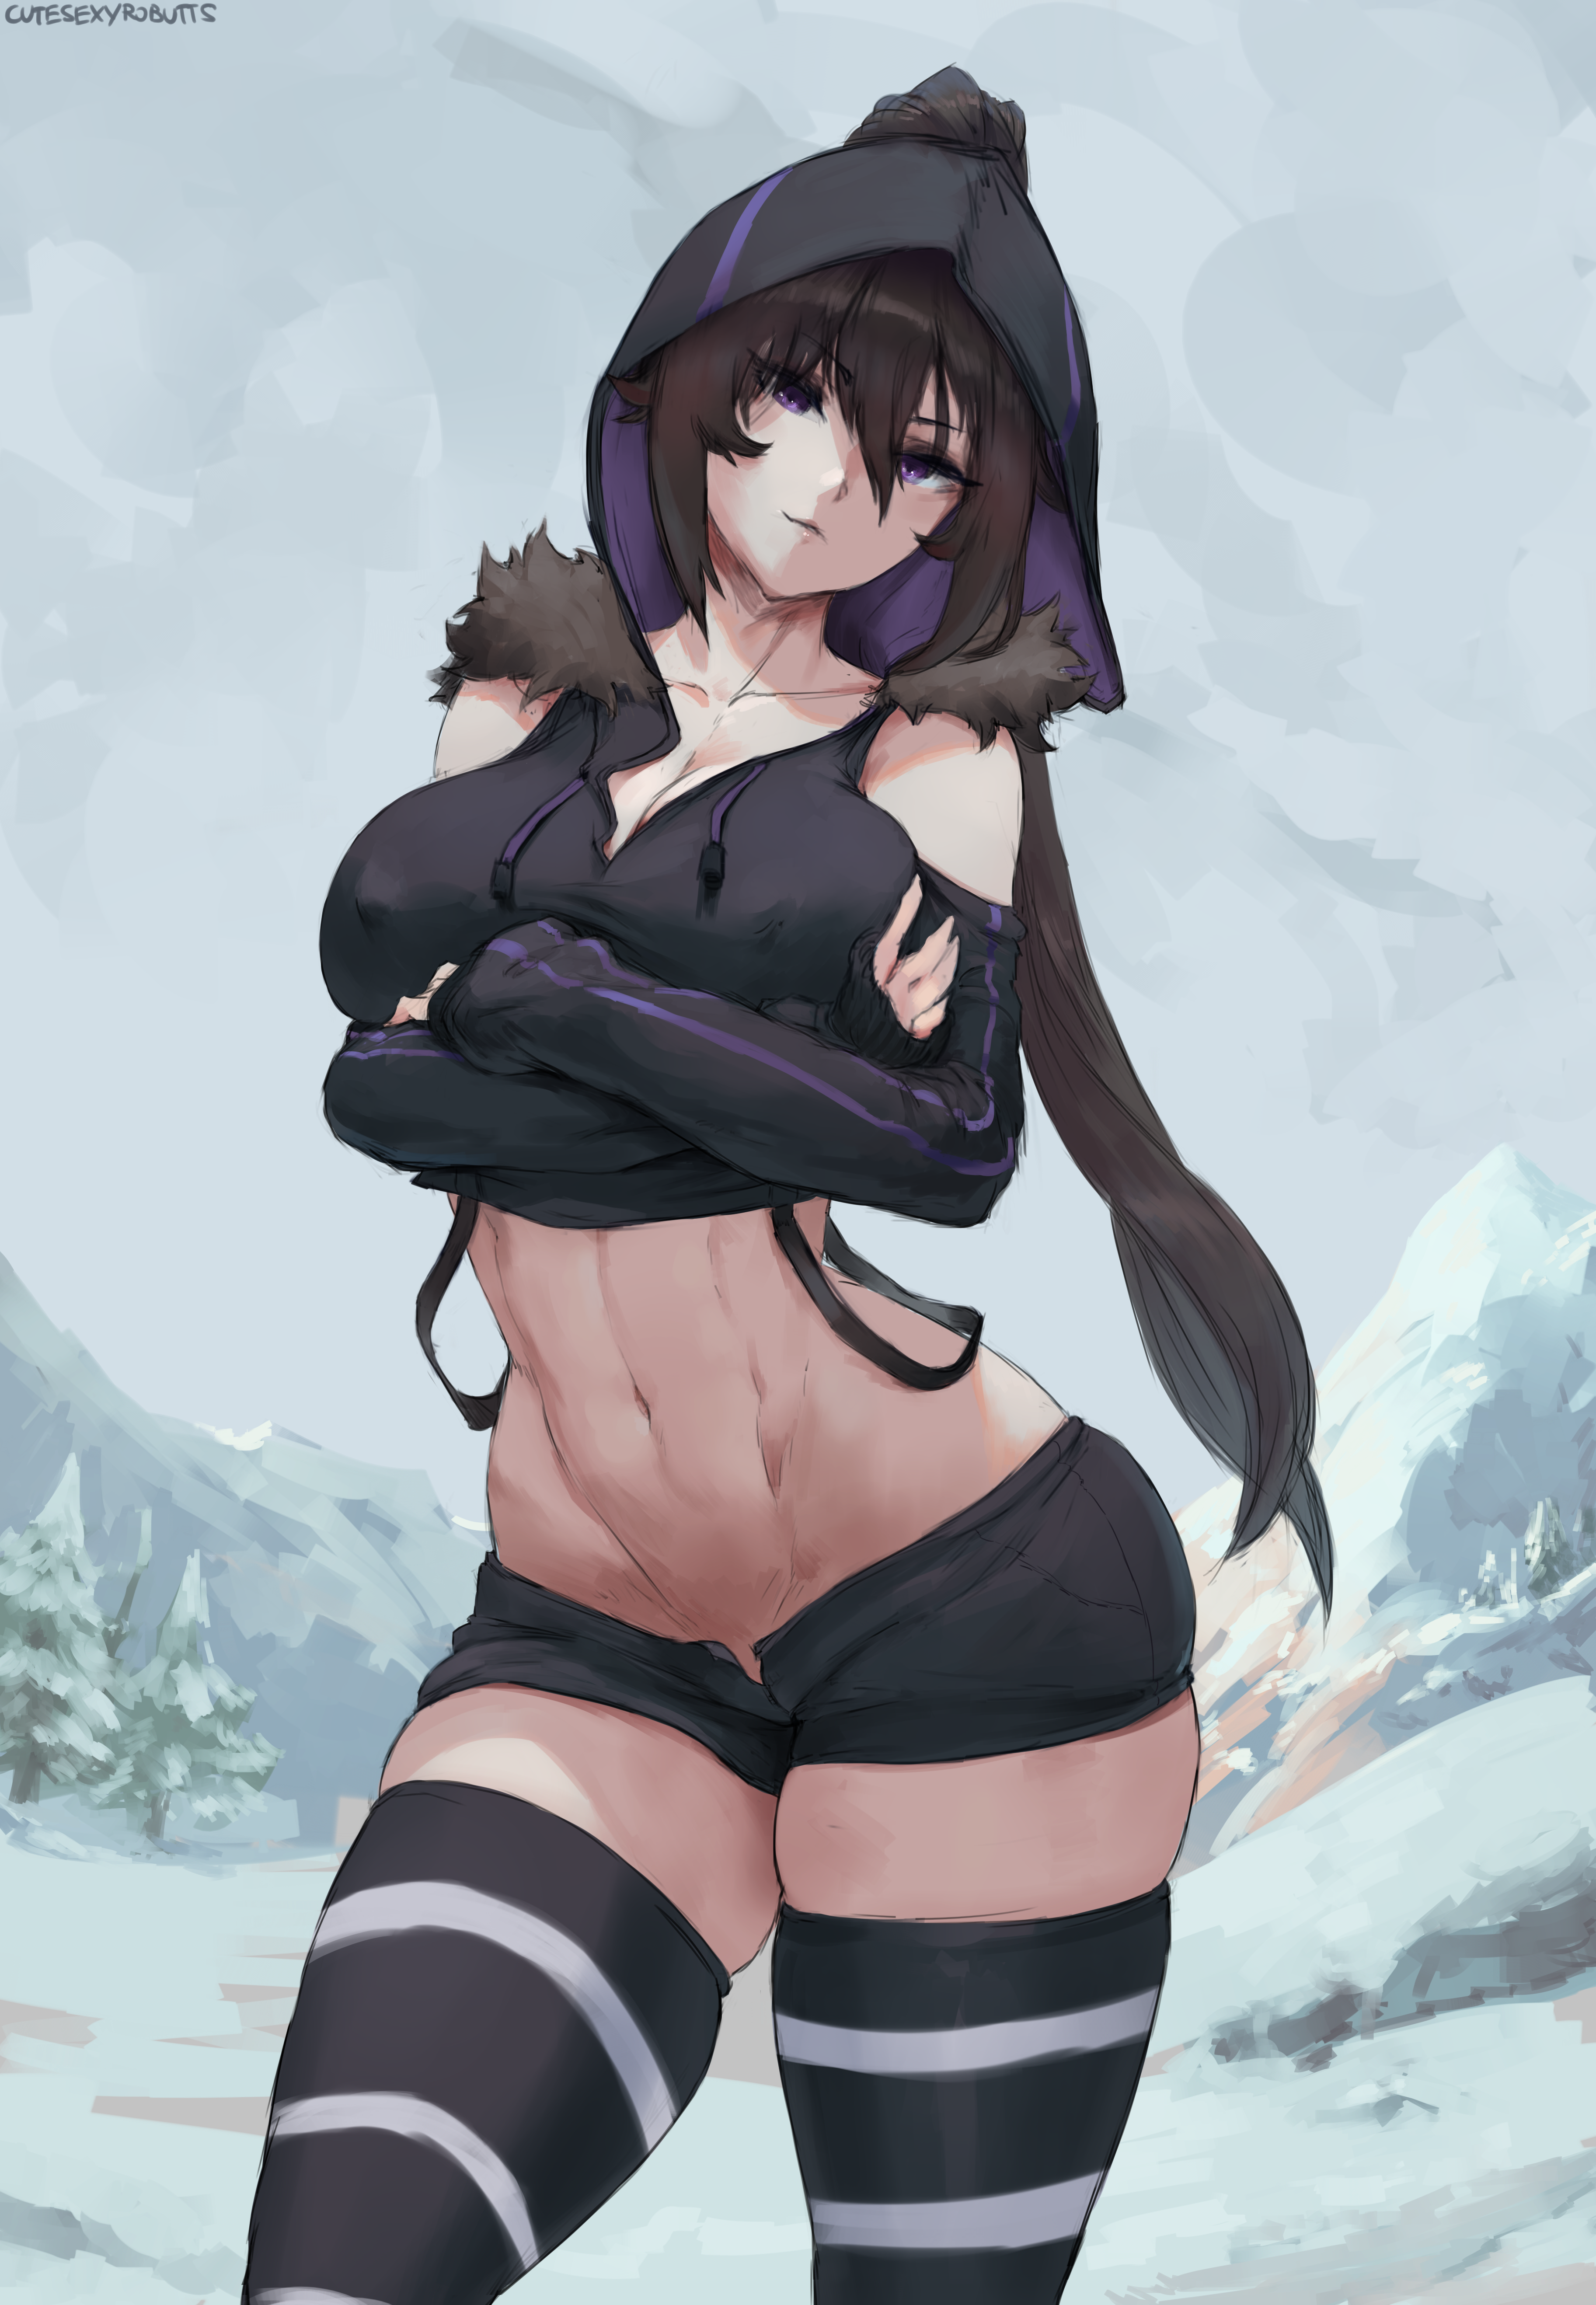 Anime 3650x5271 Cutesexyrobutts drawing brunette stockings thigh-highs